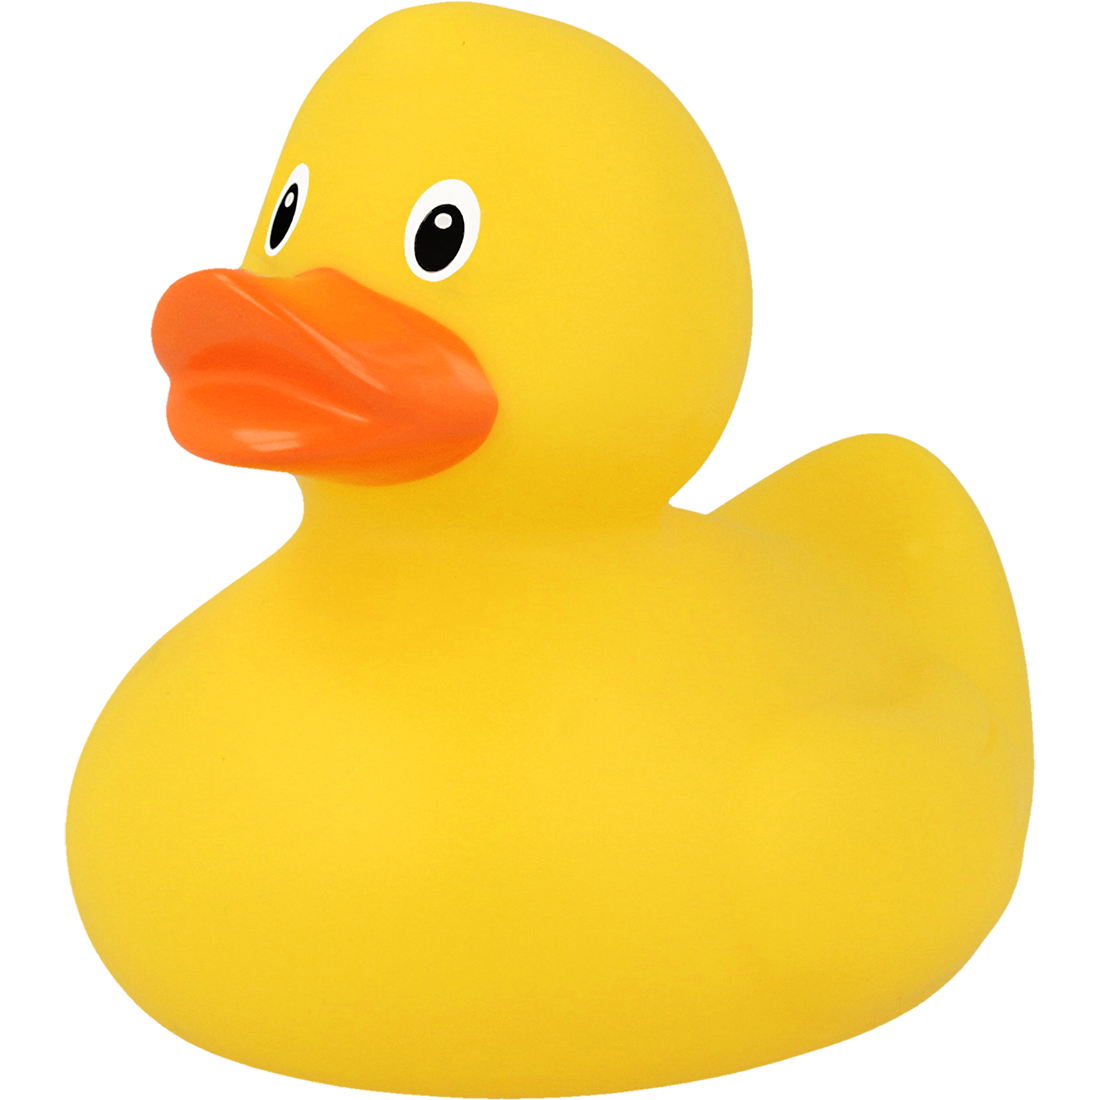 The rubber duck method consists of explaining code out loud to a rubber duck.